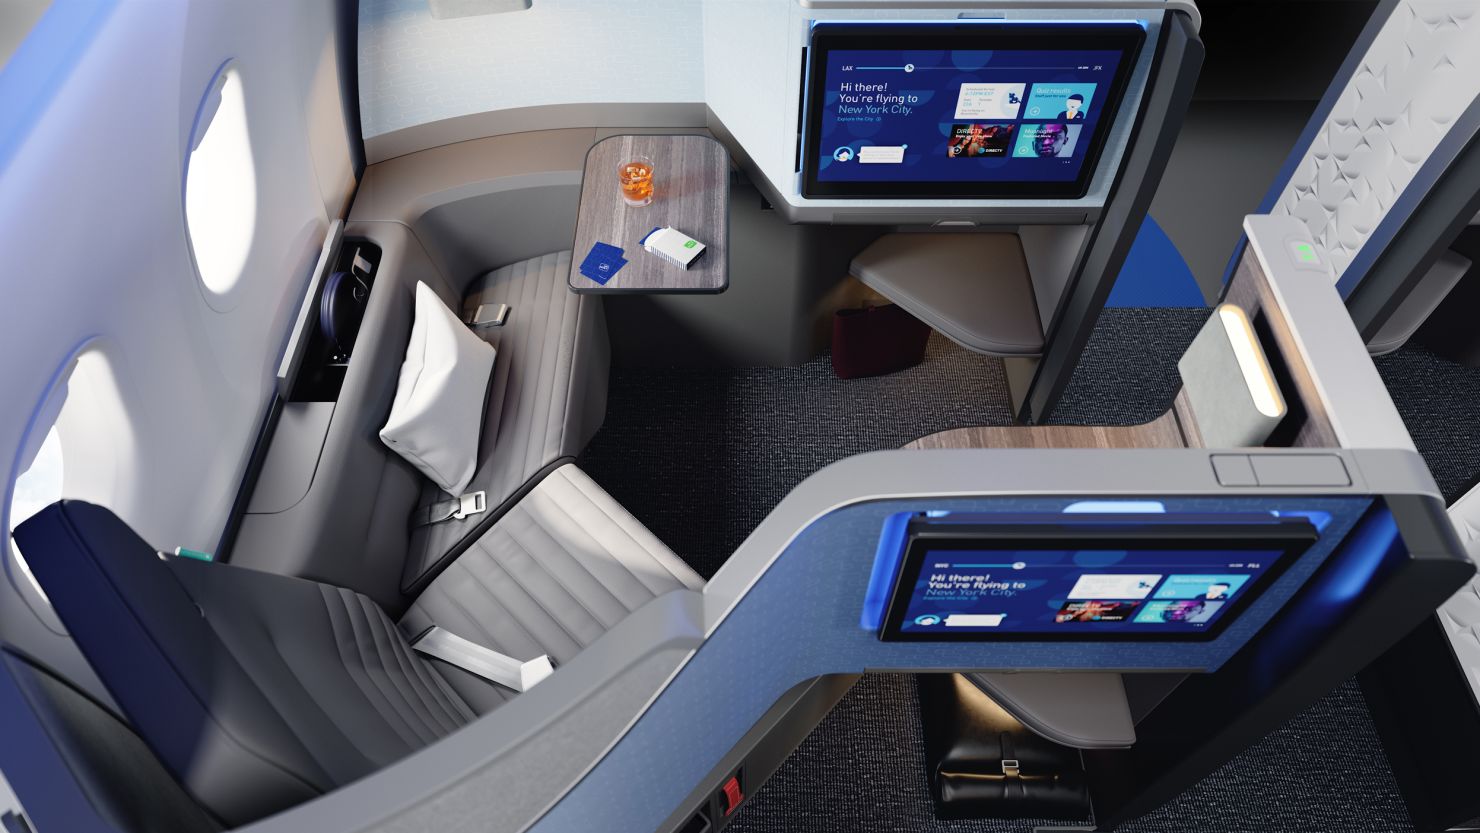 JetBlue's newest-outfitted long-haul aircraft offer an innovative new space. 